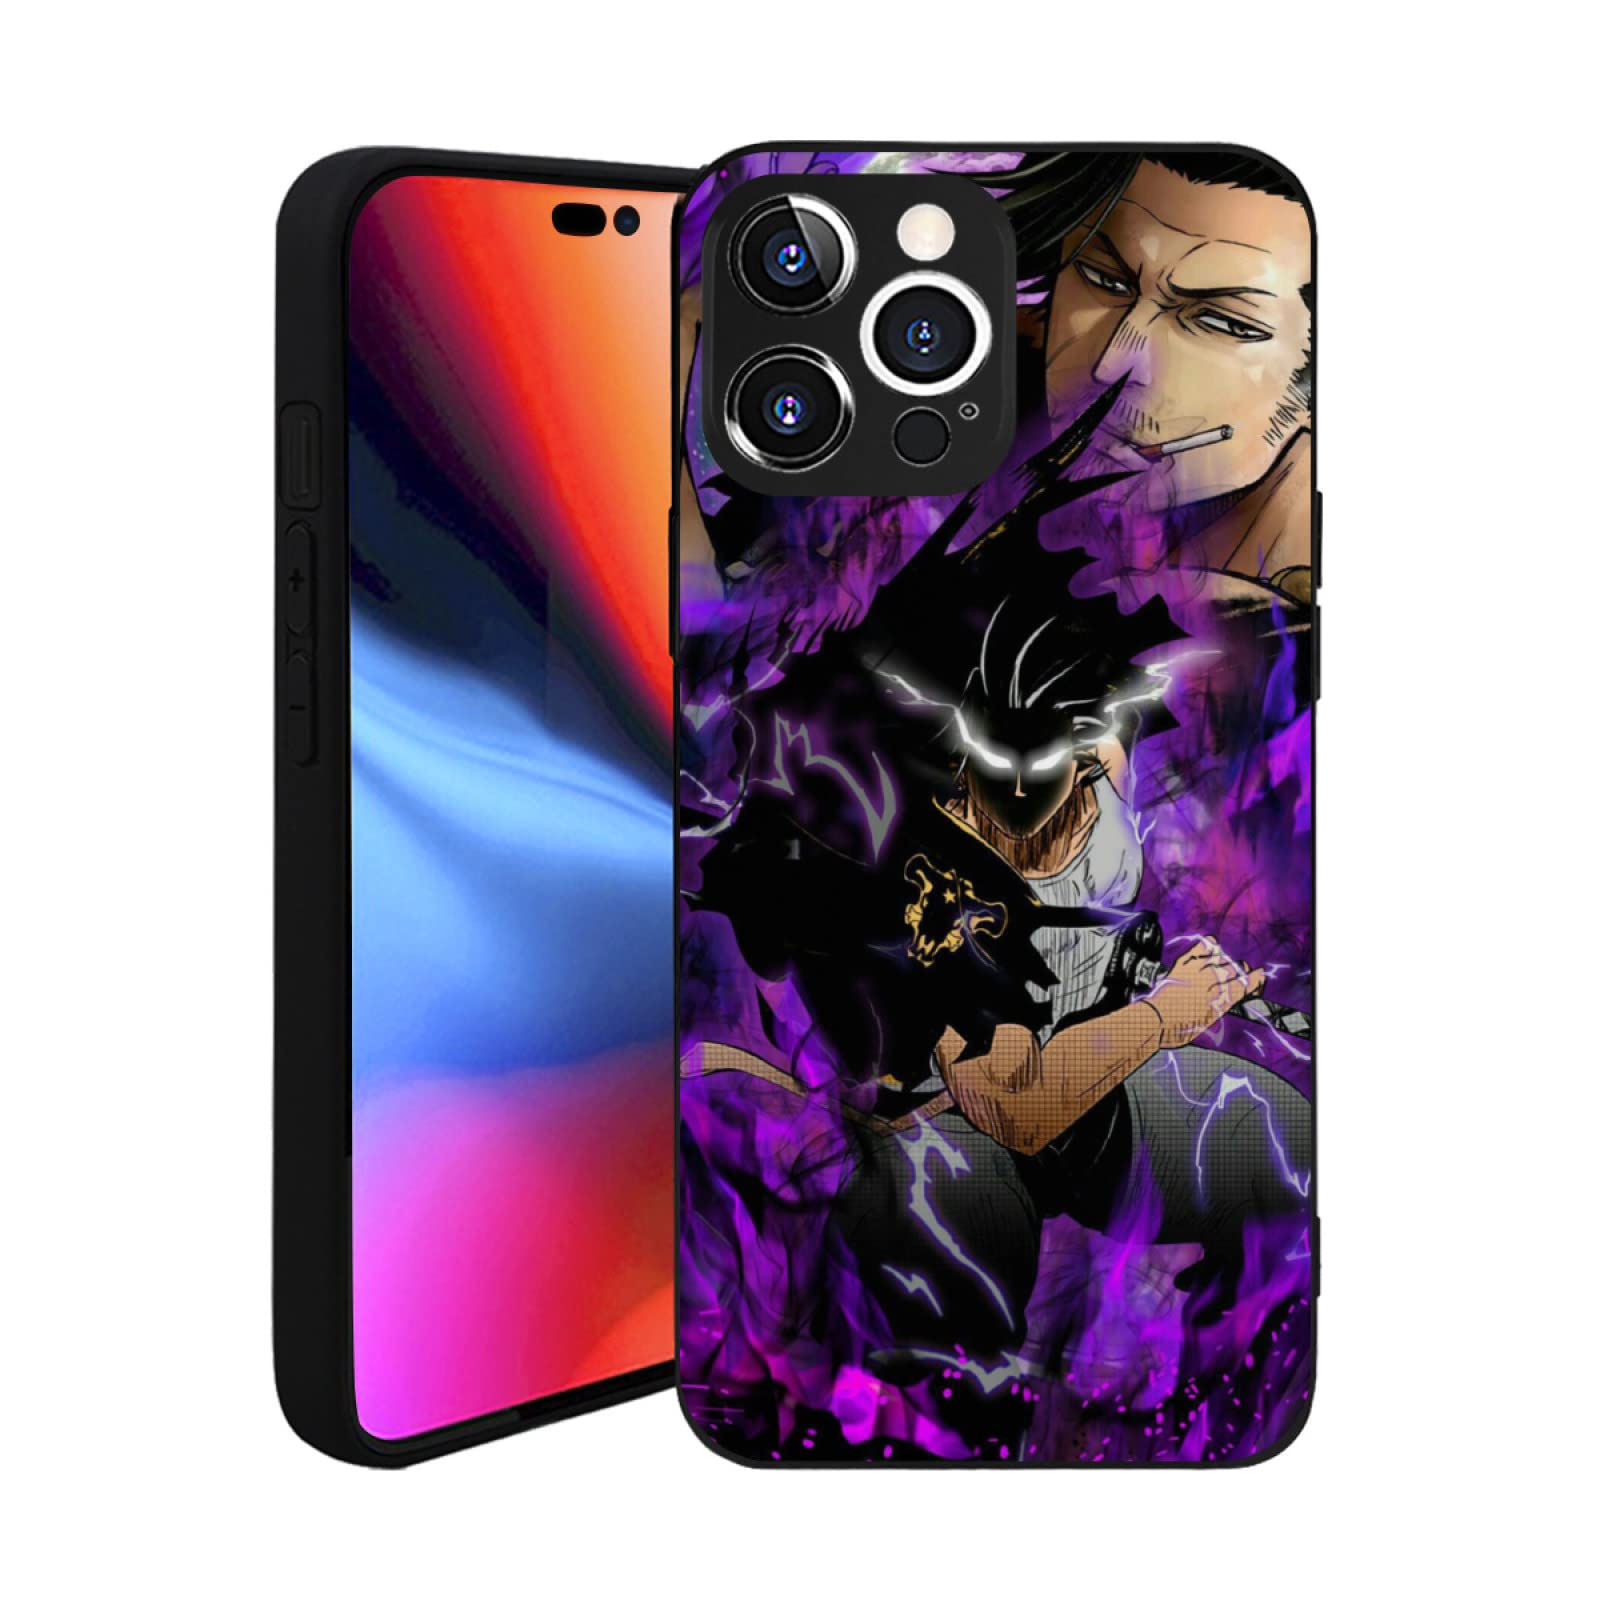 Japan Anime Demon Anime Phone Case Slayer Cover for iPhone 11 12 13 14 Pro  Max X | eBay